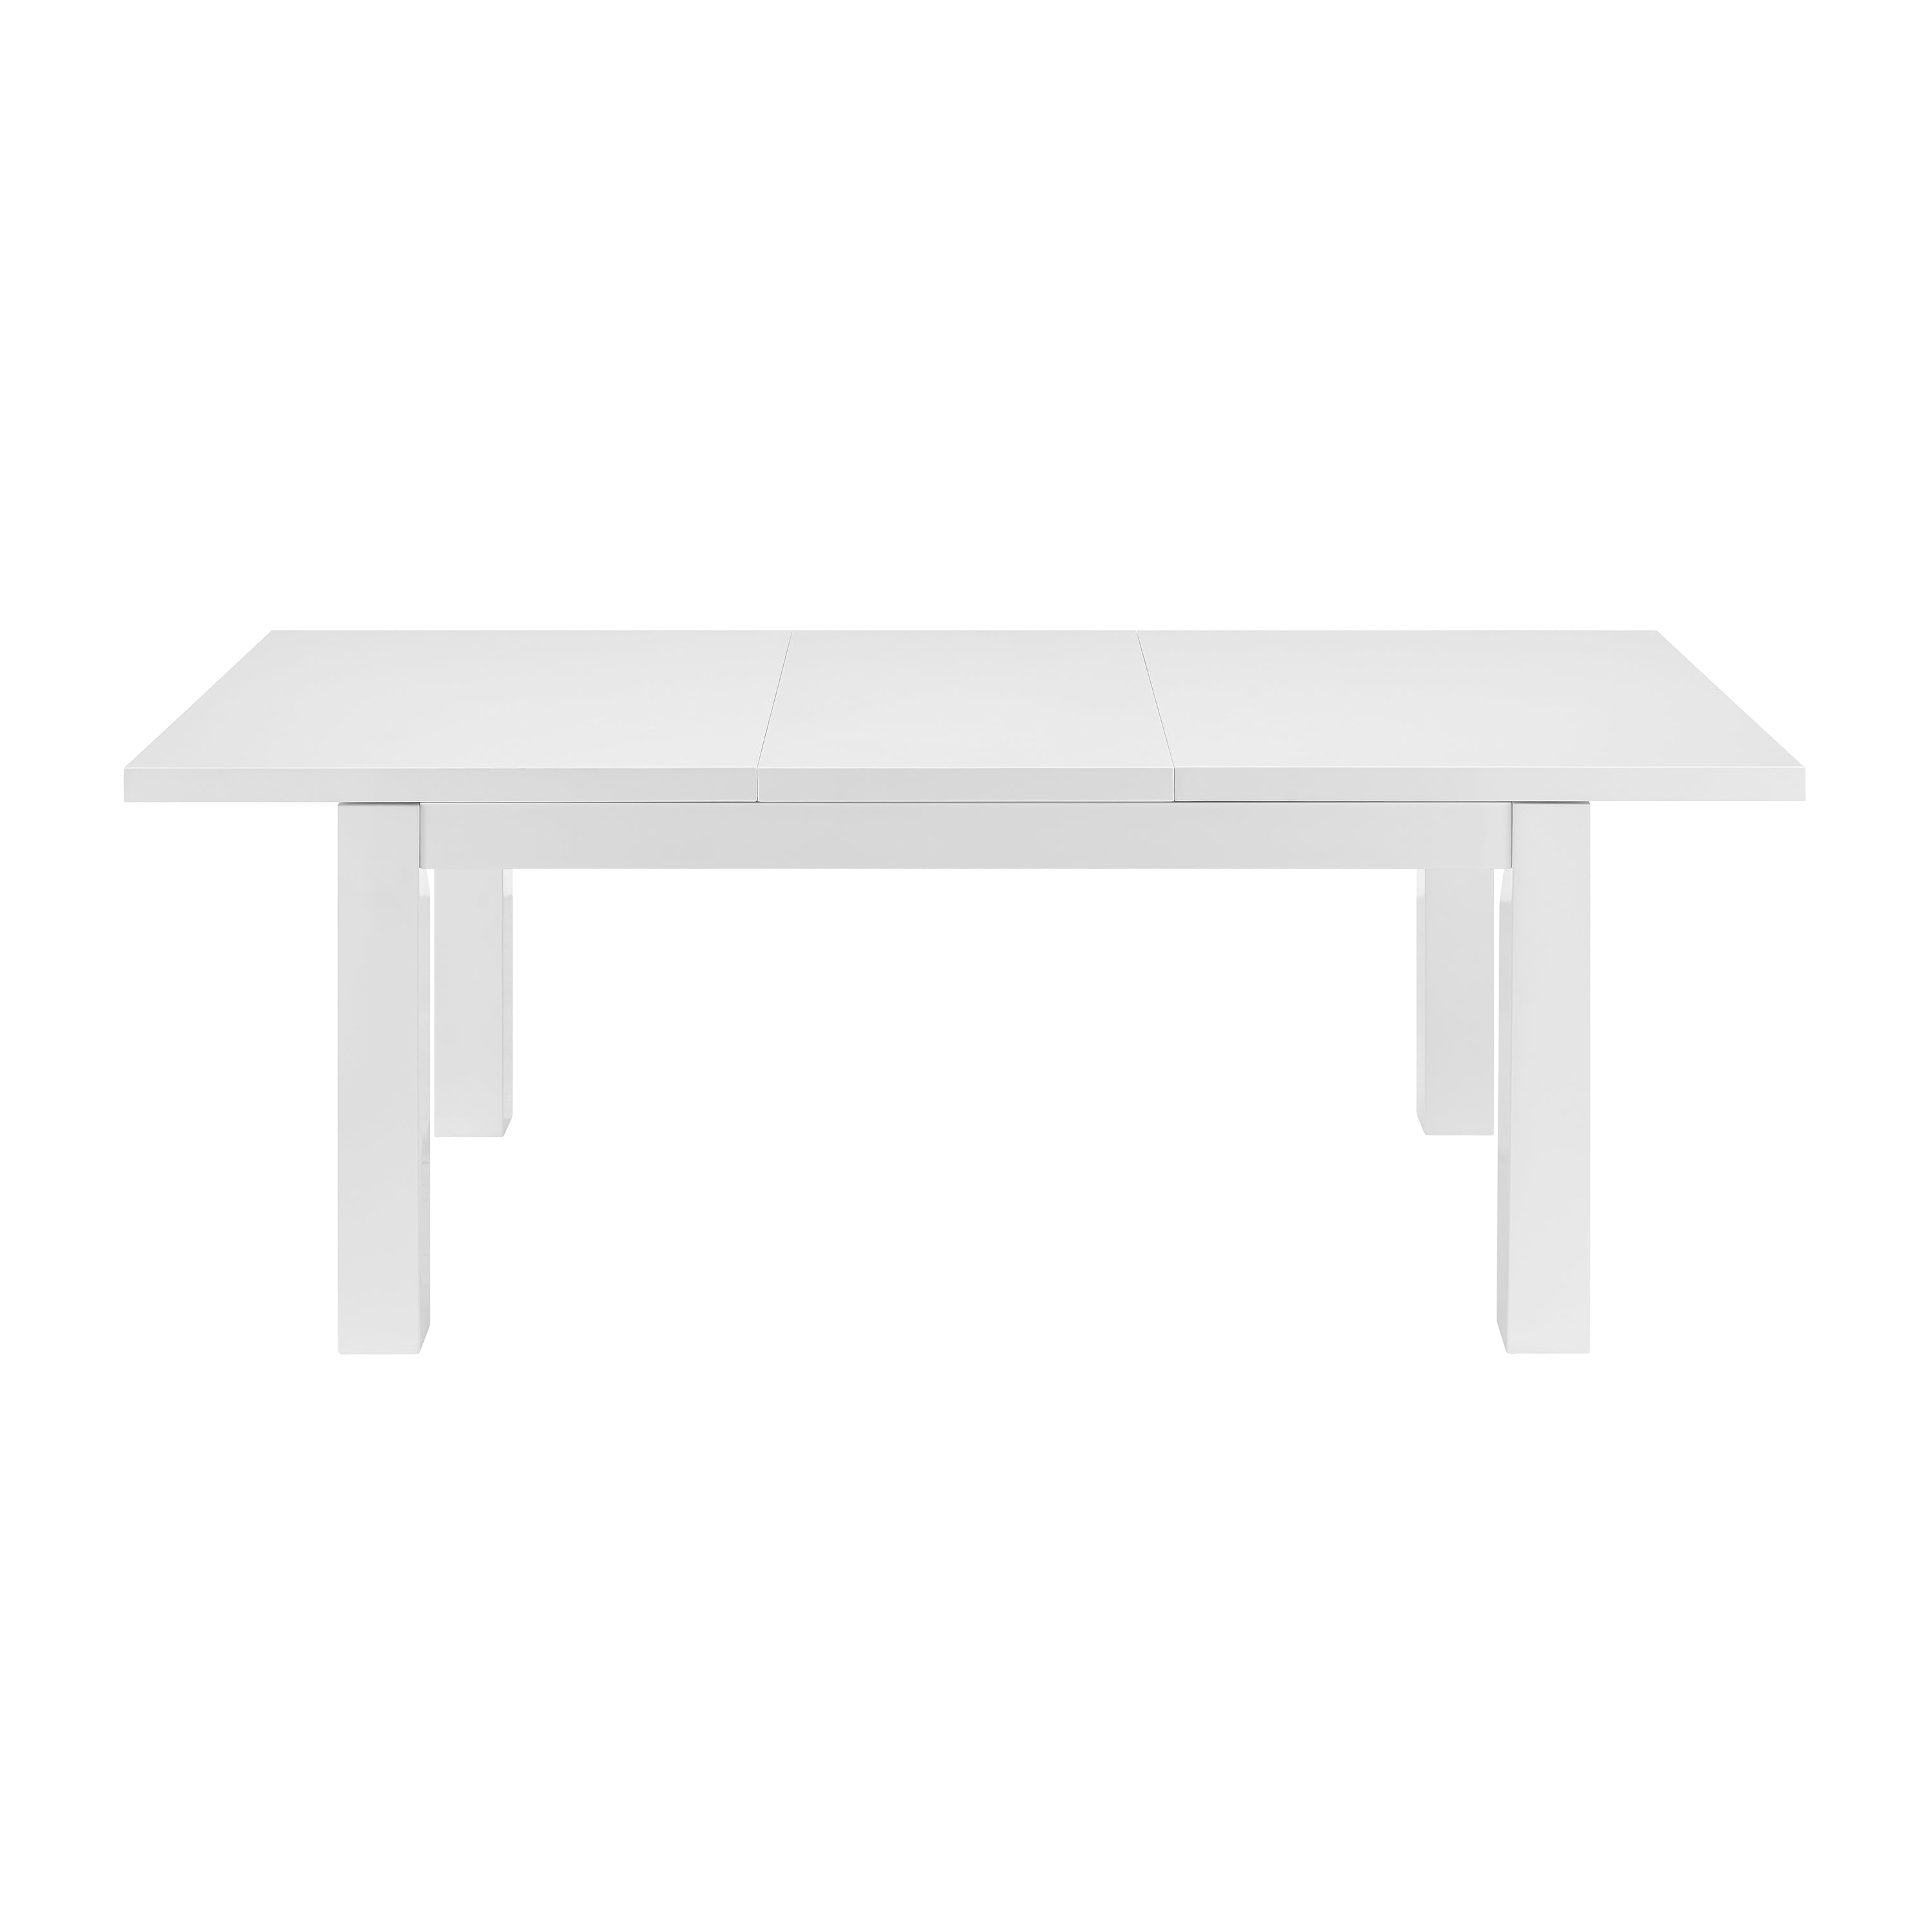 Euro Style Dining Tables - Tresero Extension Table Legs in High Gloss White